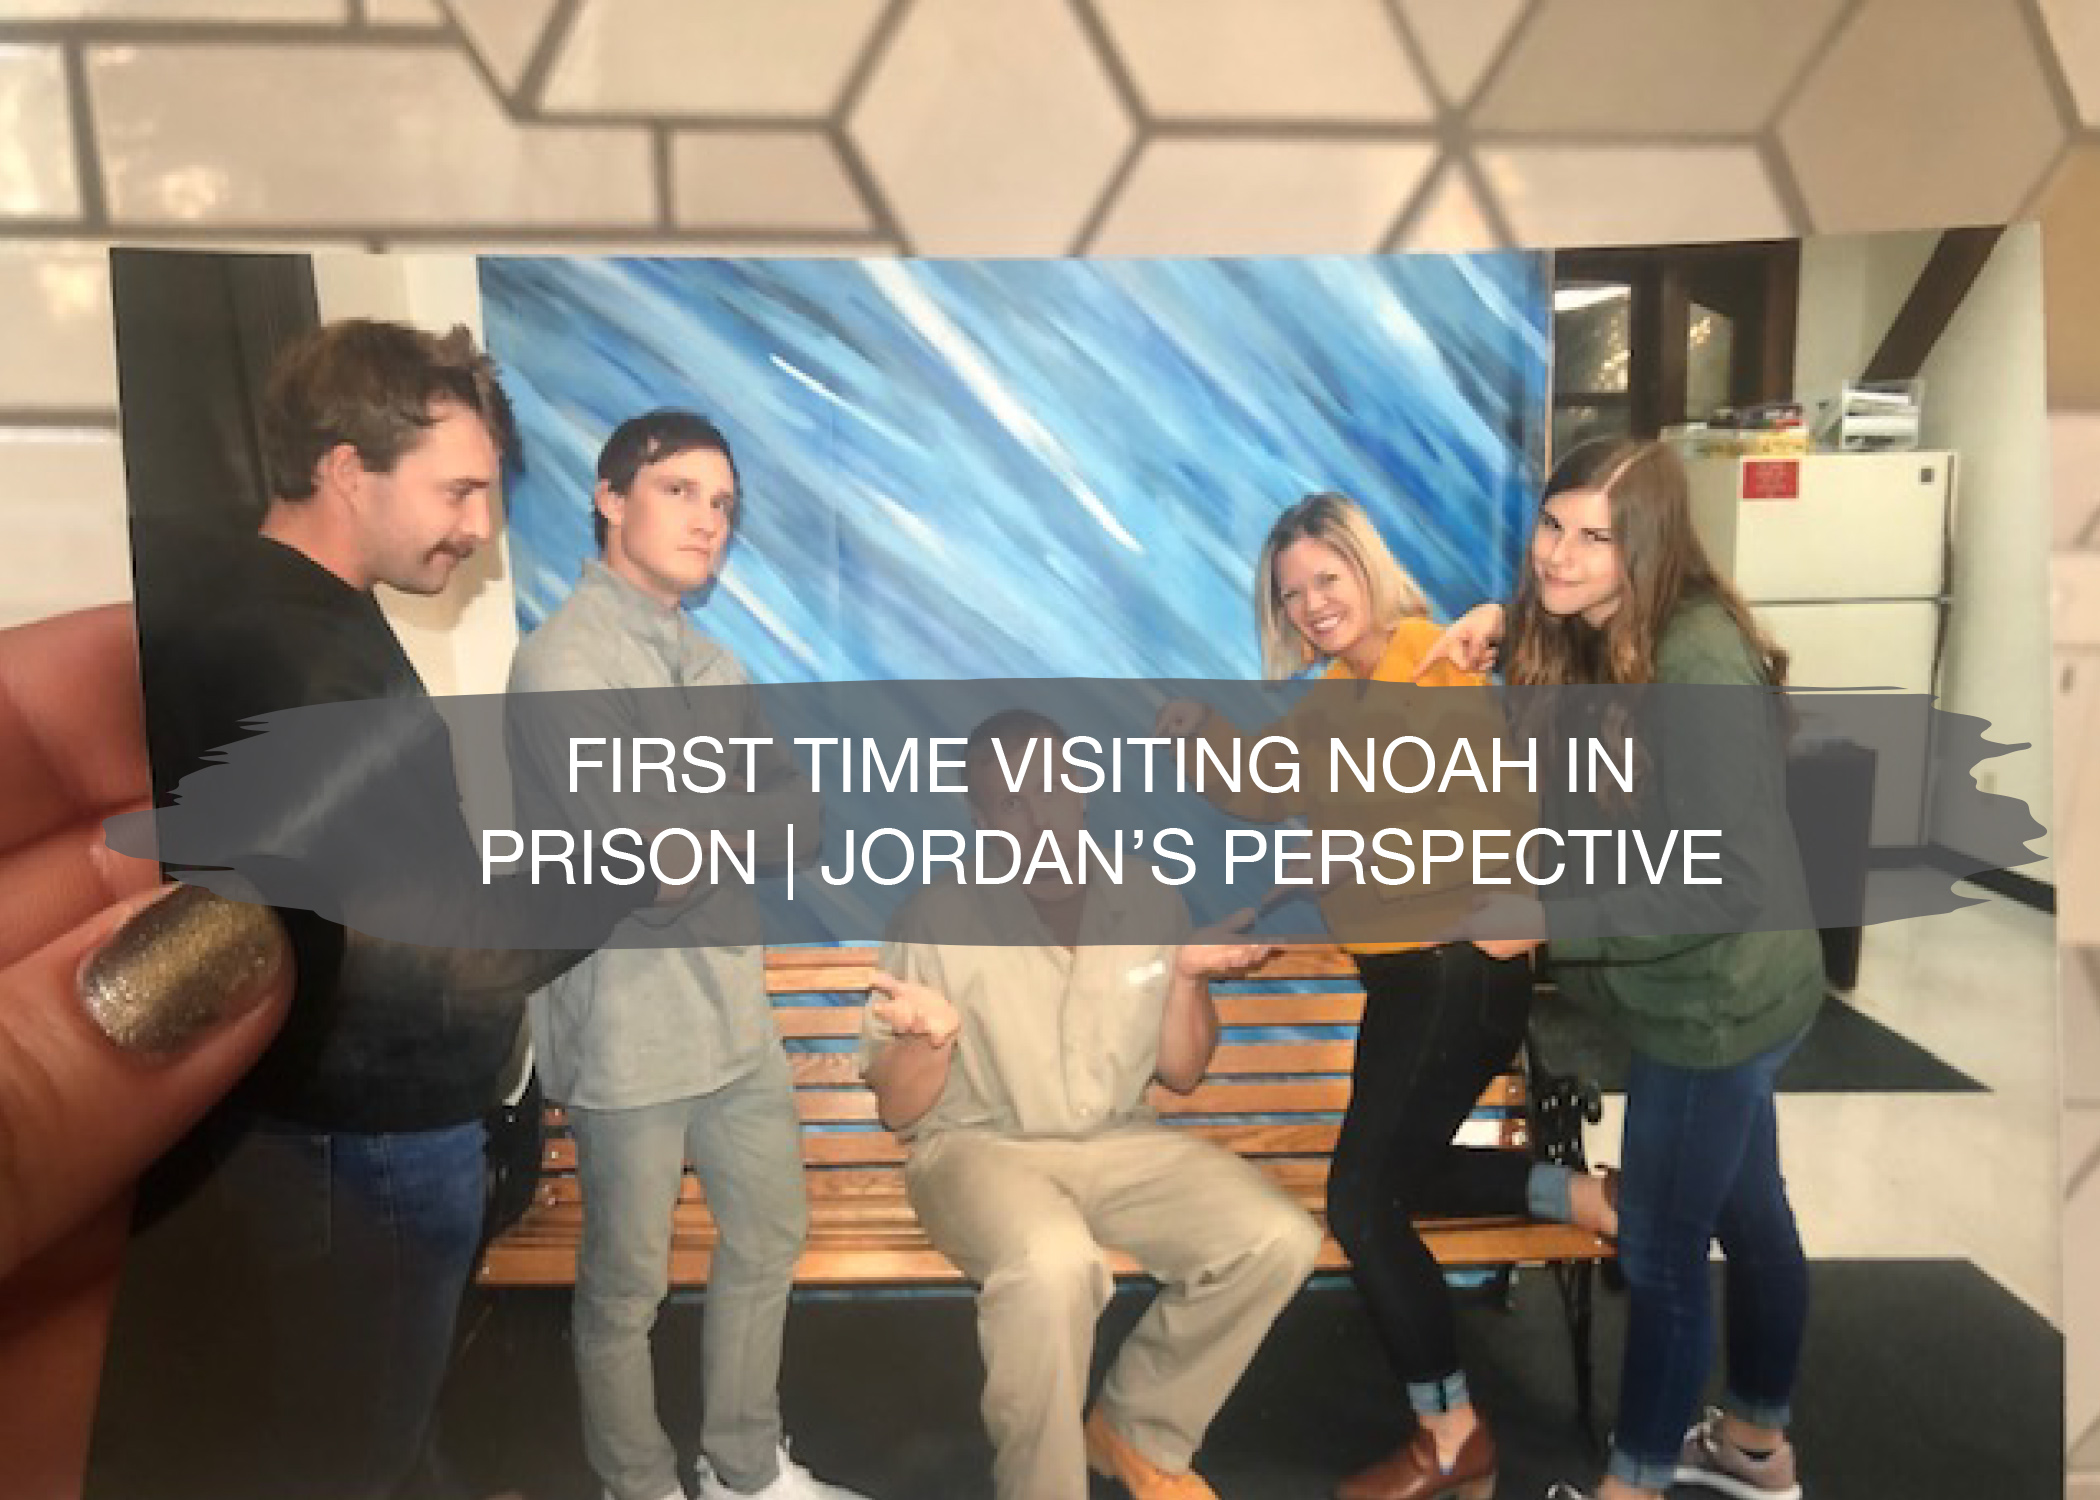 Visiting Prison for the 1st time | Noah Bergland | construction2style